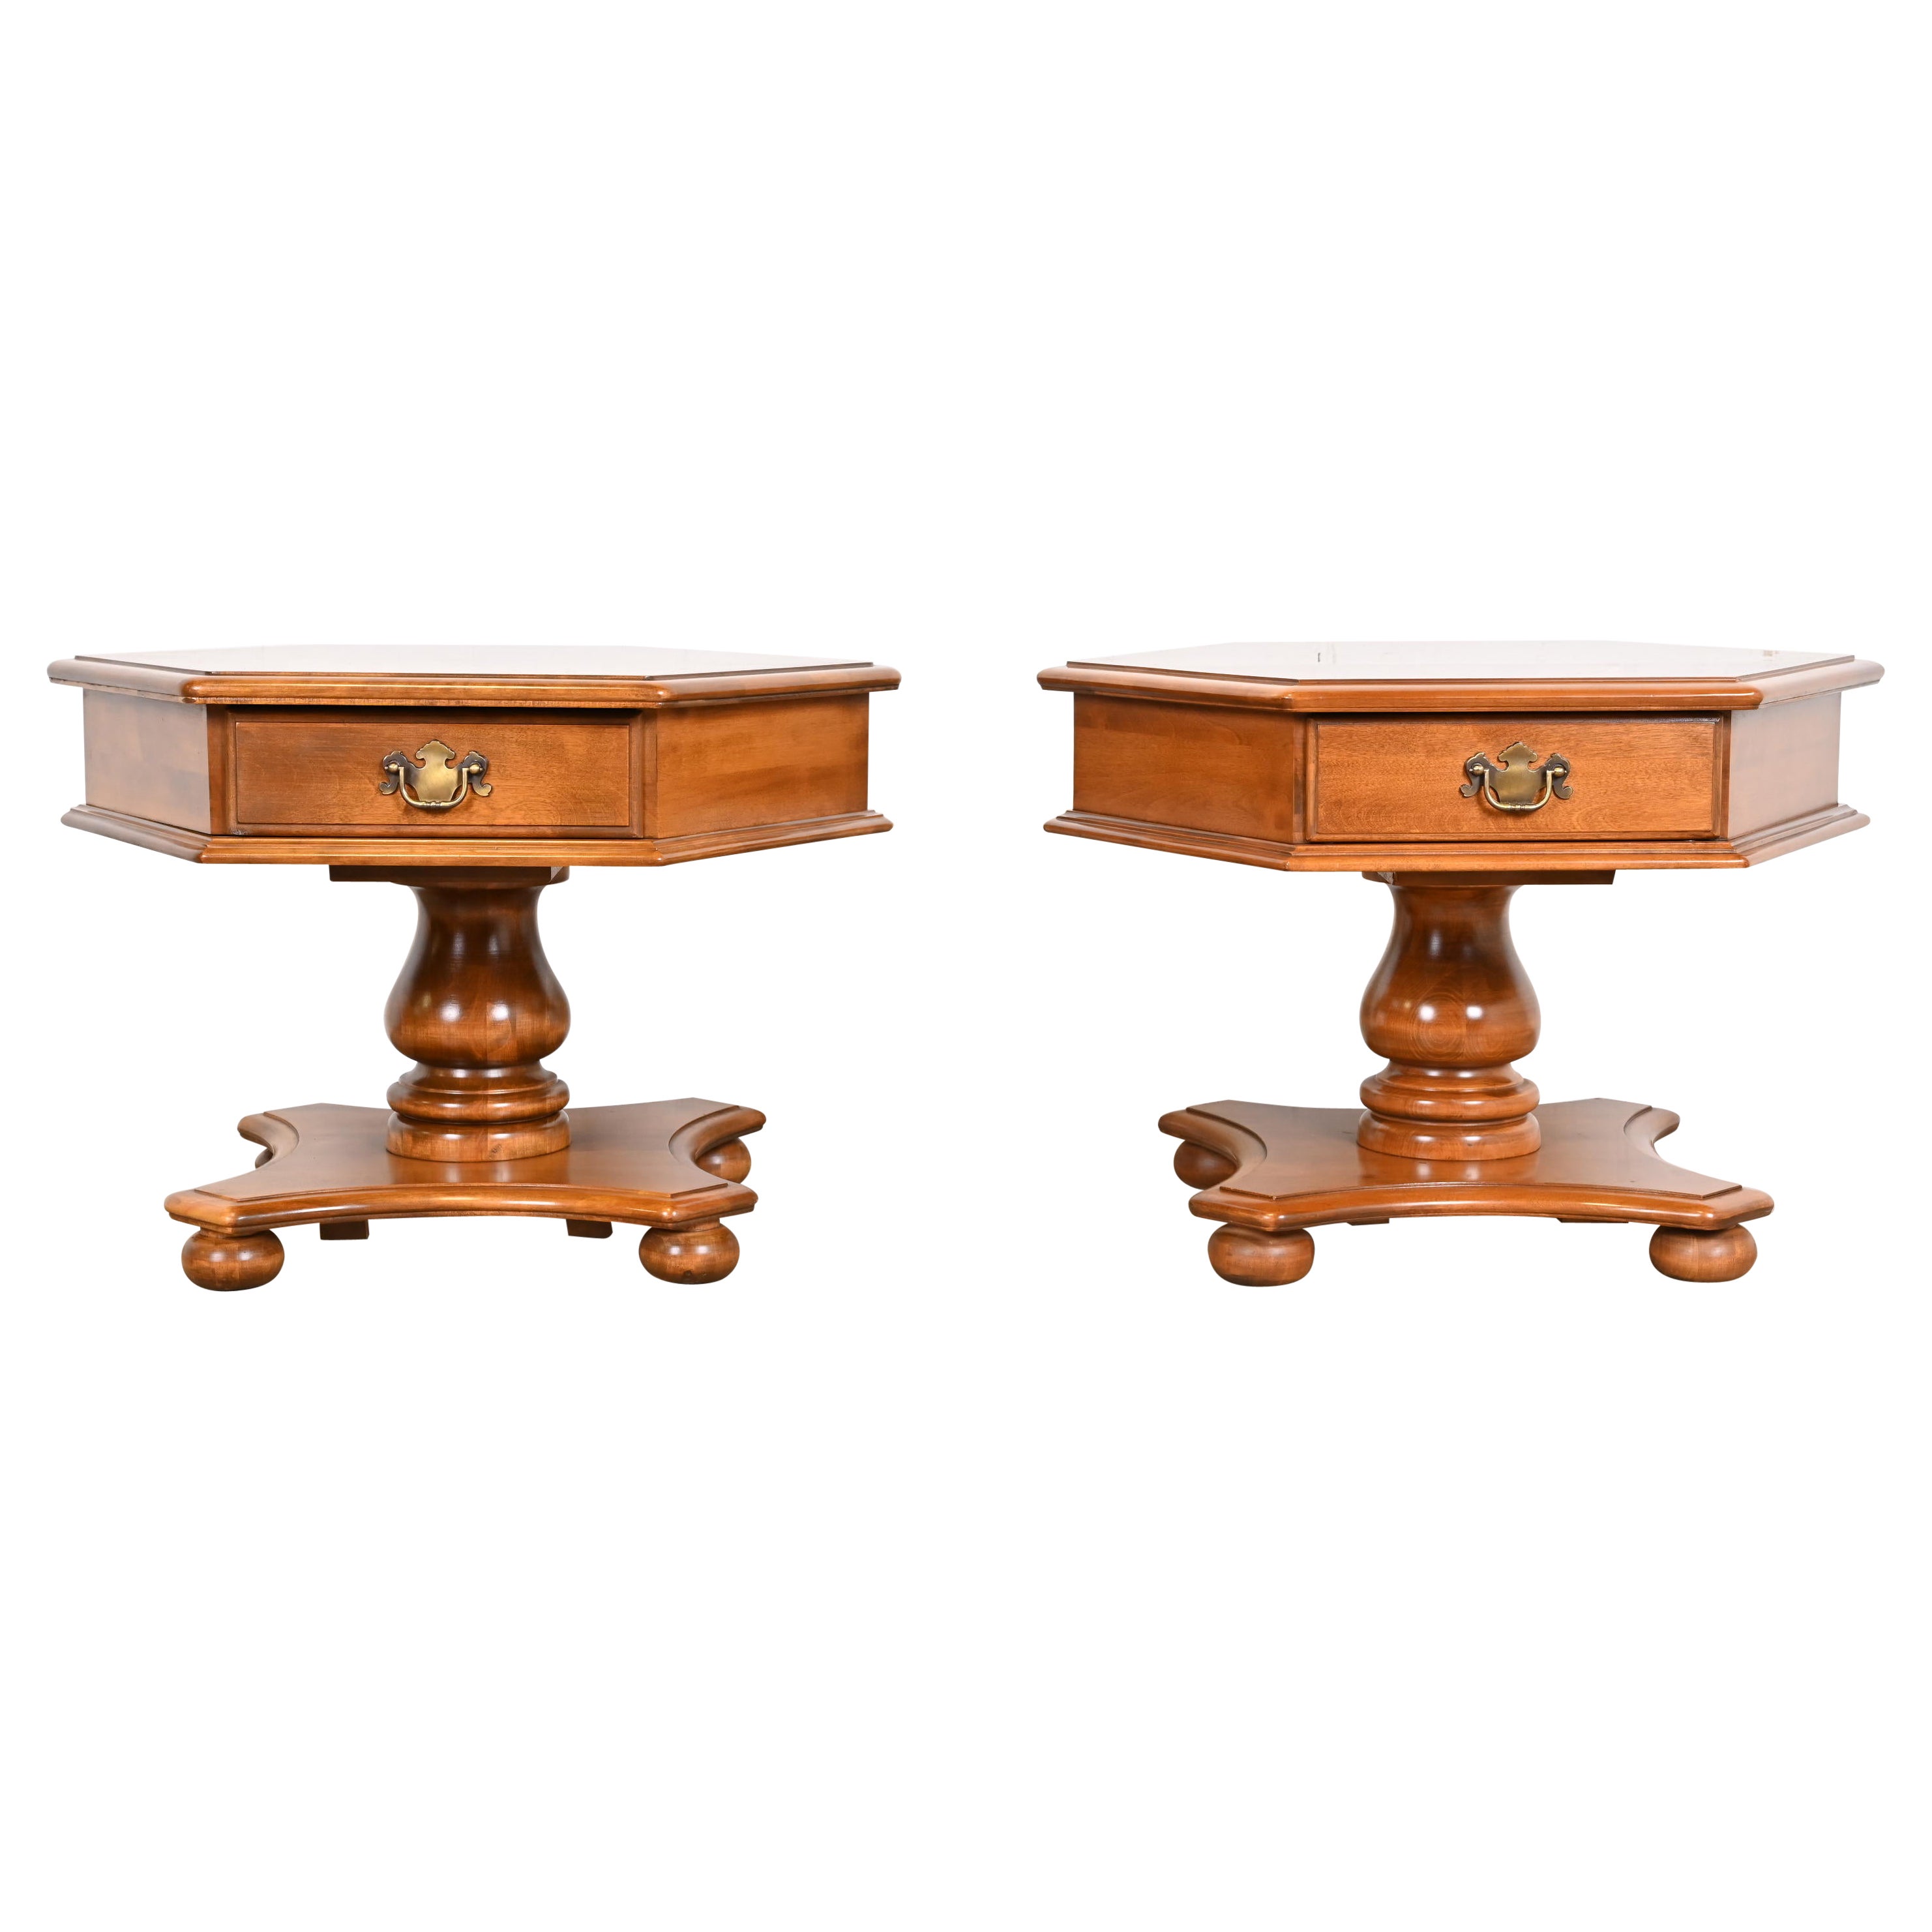 American Colonial Solid Birch Pedestal Side Tables, Pair